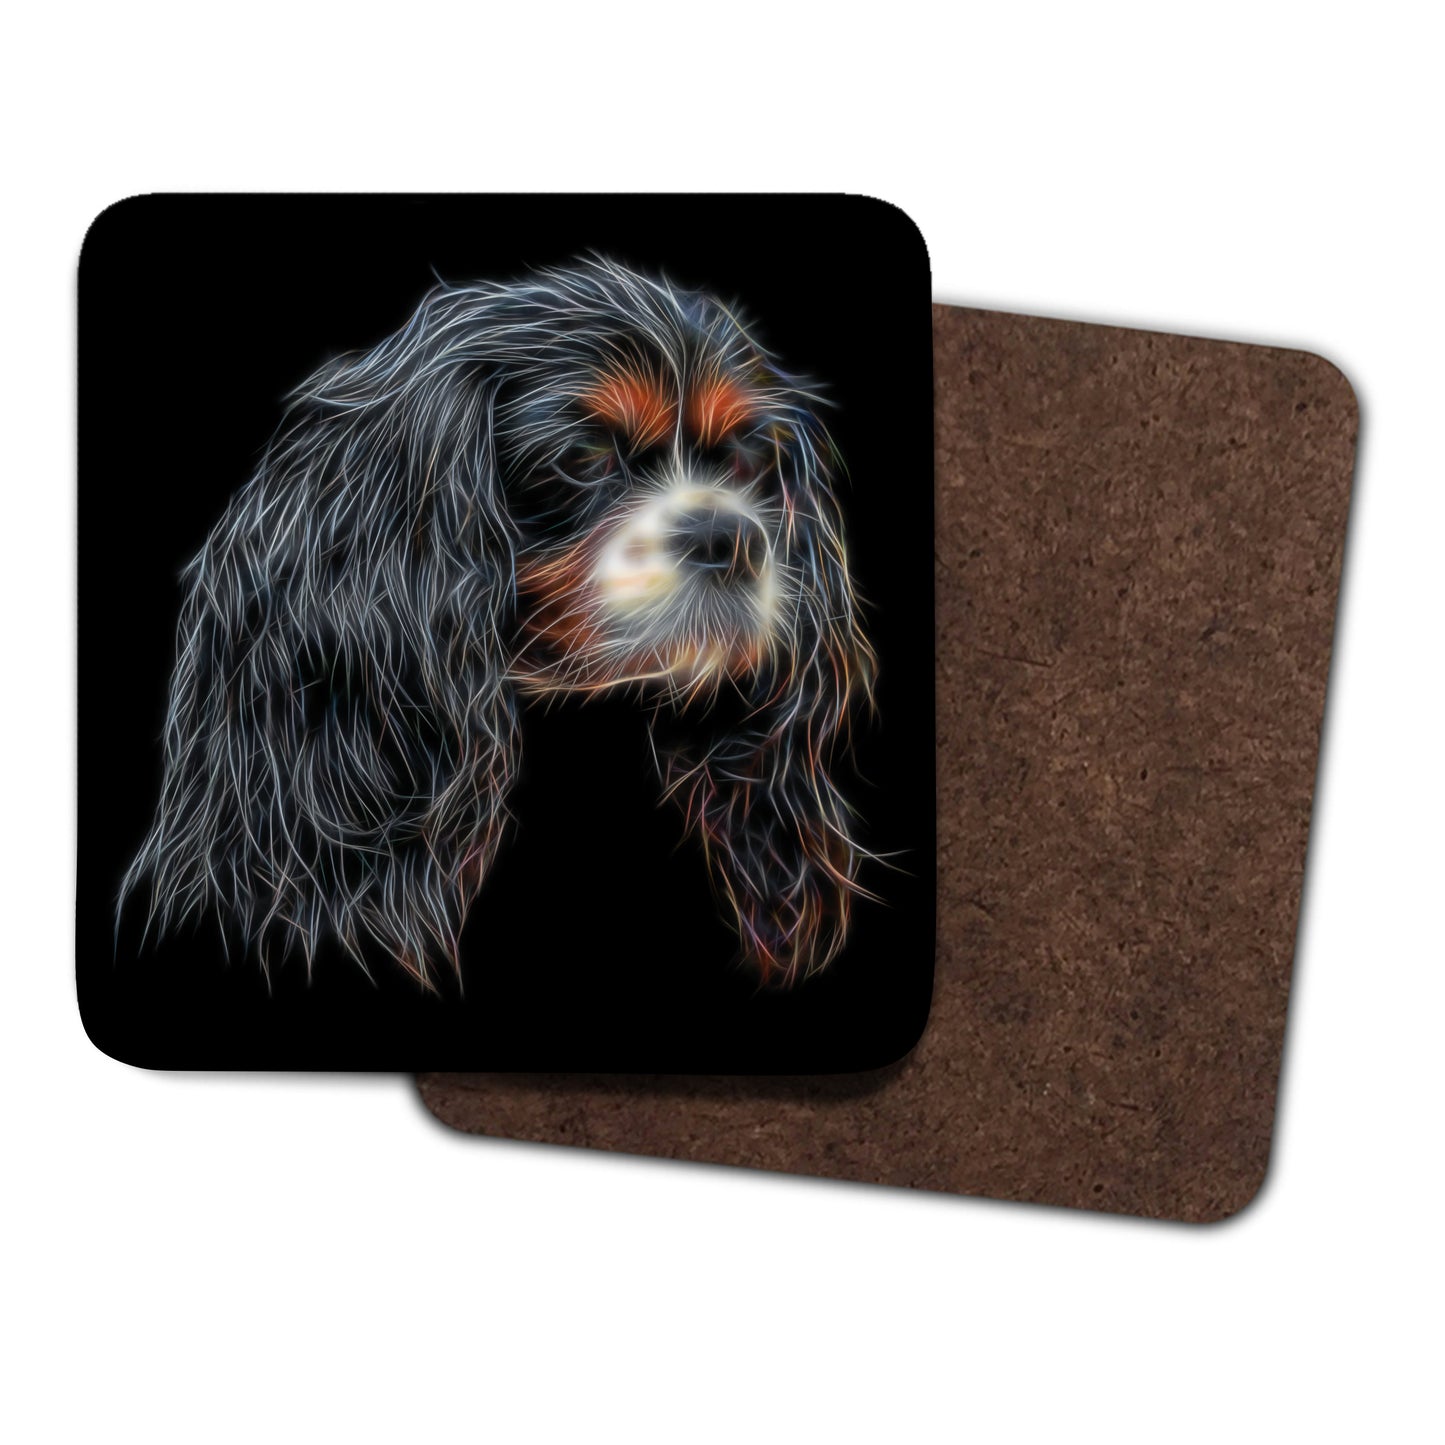 Tricolour King Charles Spaniel Coasters, Set of 2, with Fractal Art Design